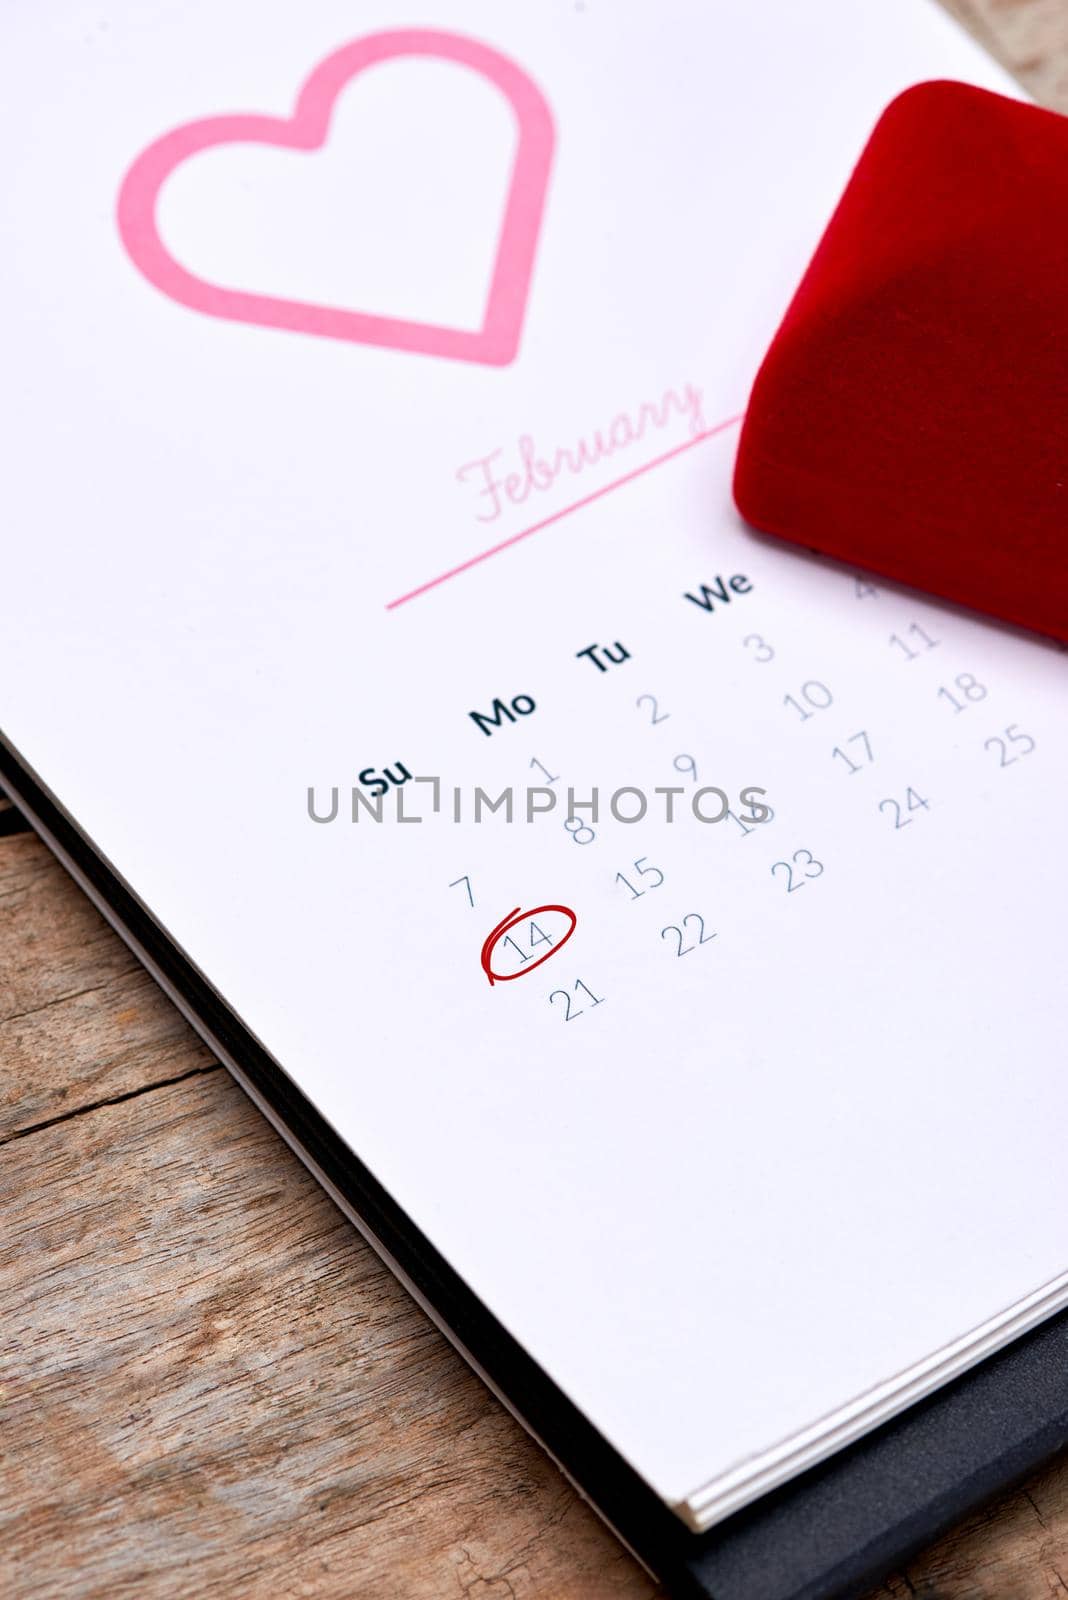 Calendar showing the date 14th of February. Red rose, hearts and gift box on wooden table.